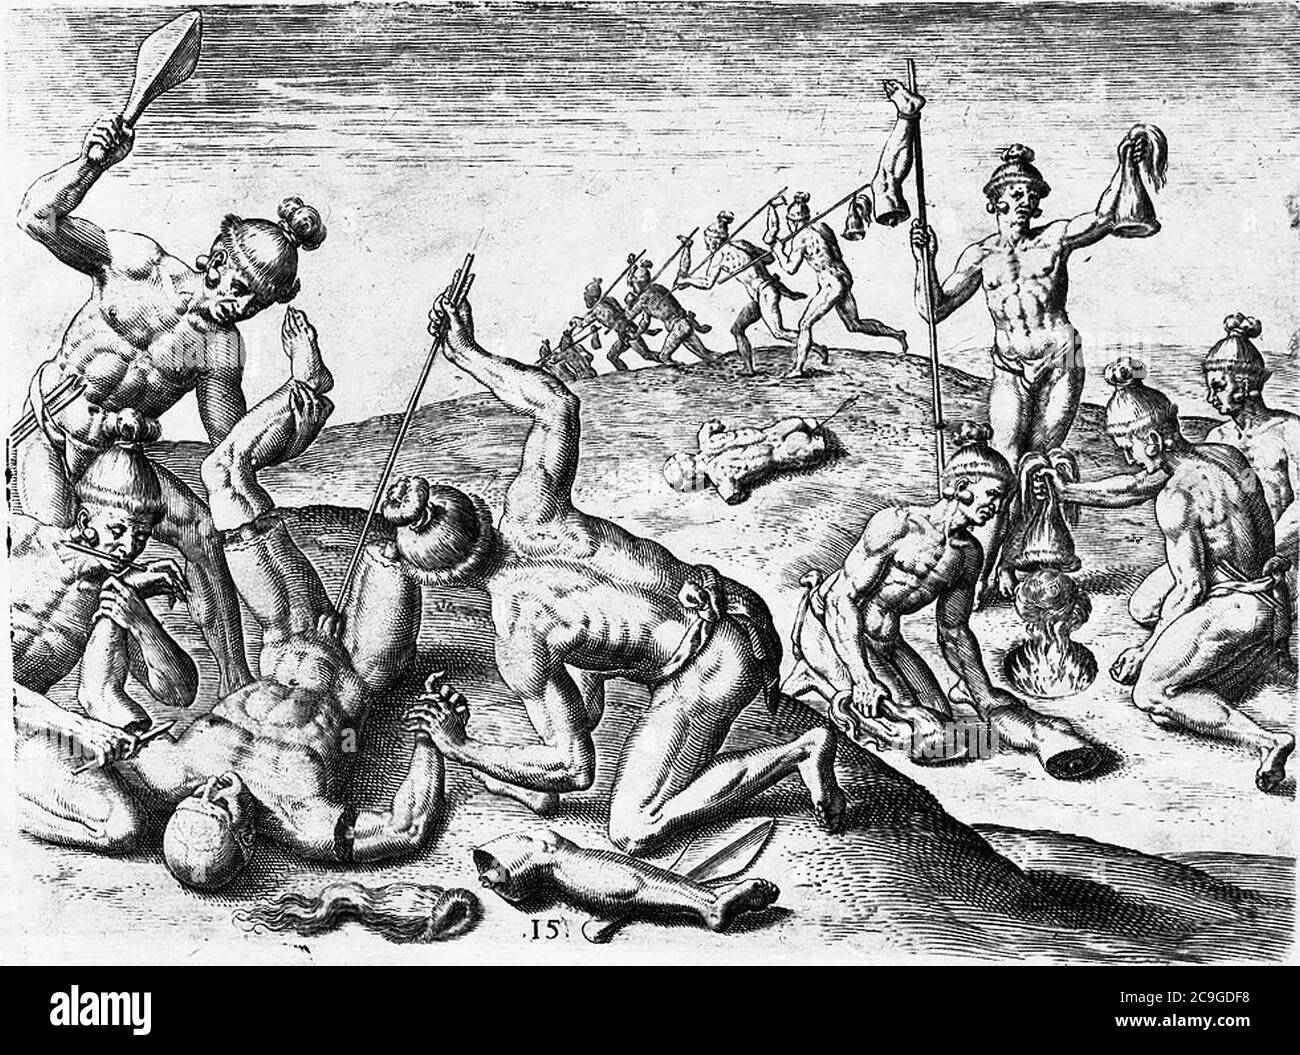 Jacques-le-moyne-how-the-indians-treated-the-corpses-of-their-enemy-clean. Stock Photo